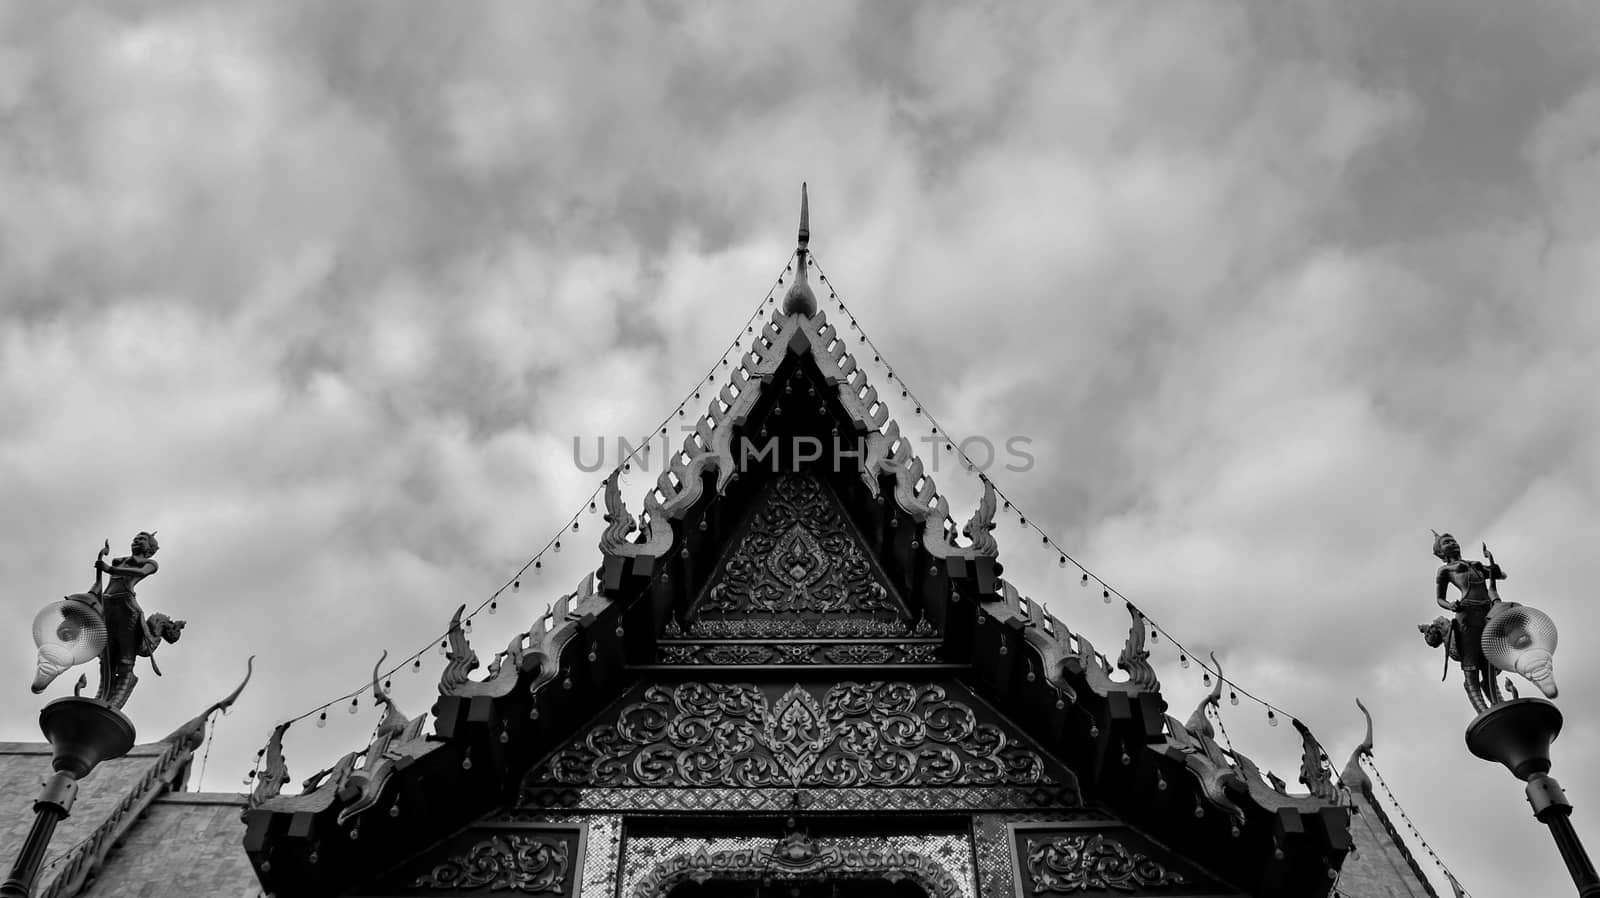 Monochromatic Symmetrical Buddhist Temple Roof in Bangkok Thailand with Beautiful Patterns. Cloudy Sky. High Contrast.